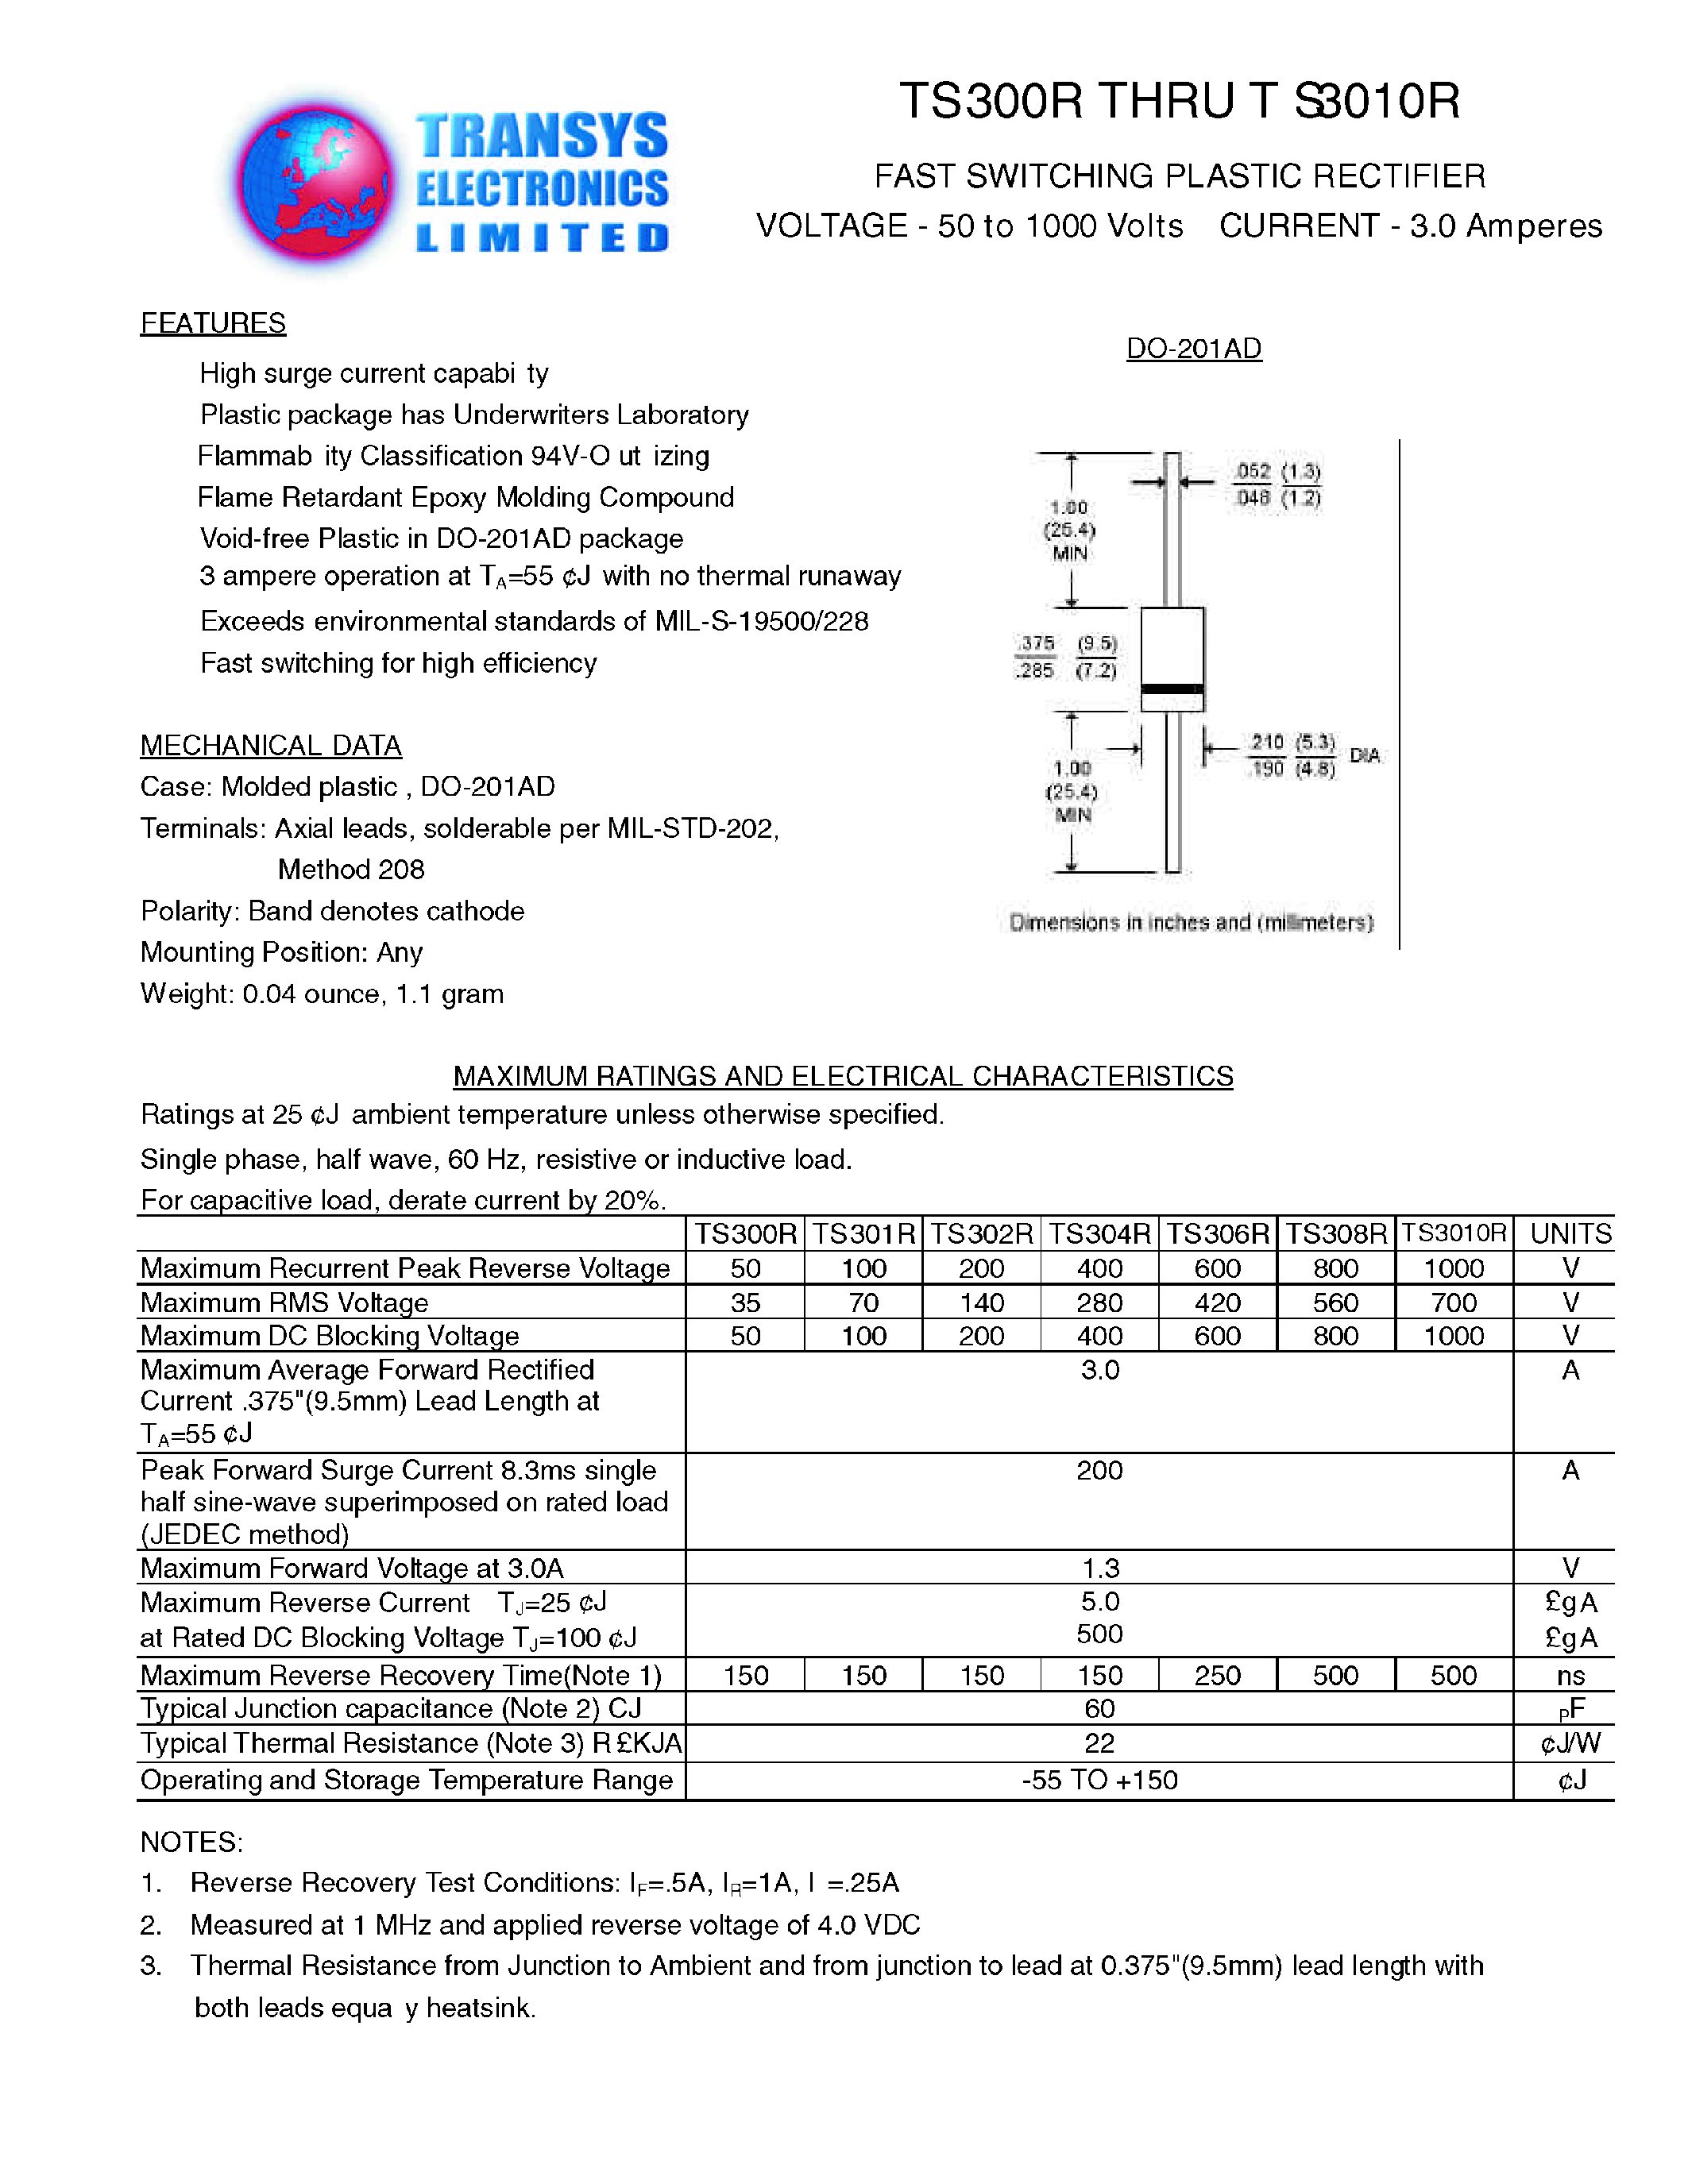 Datasheet TS308R - FAST SWITCHING PLASTIC RECTIFIER page 1